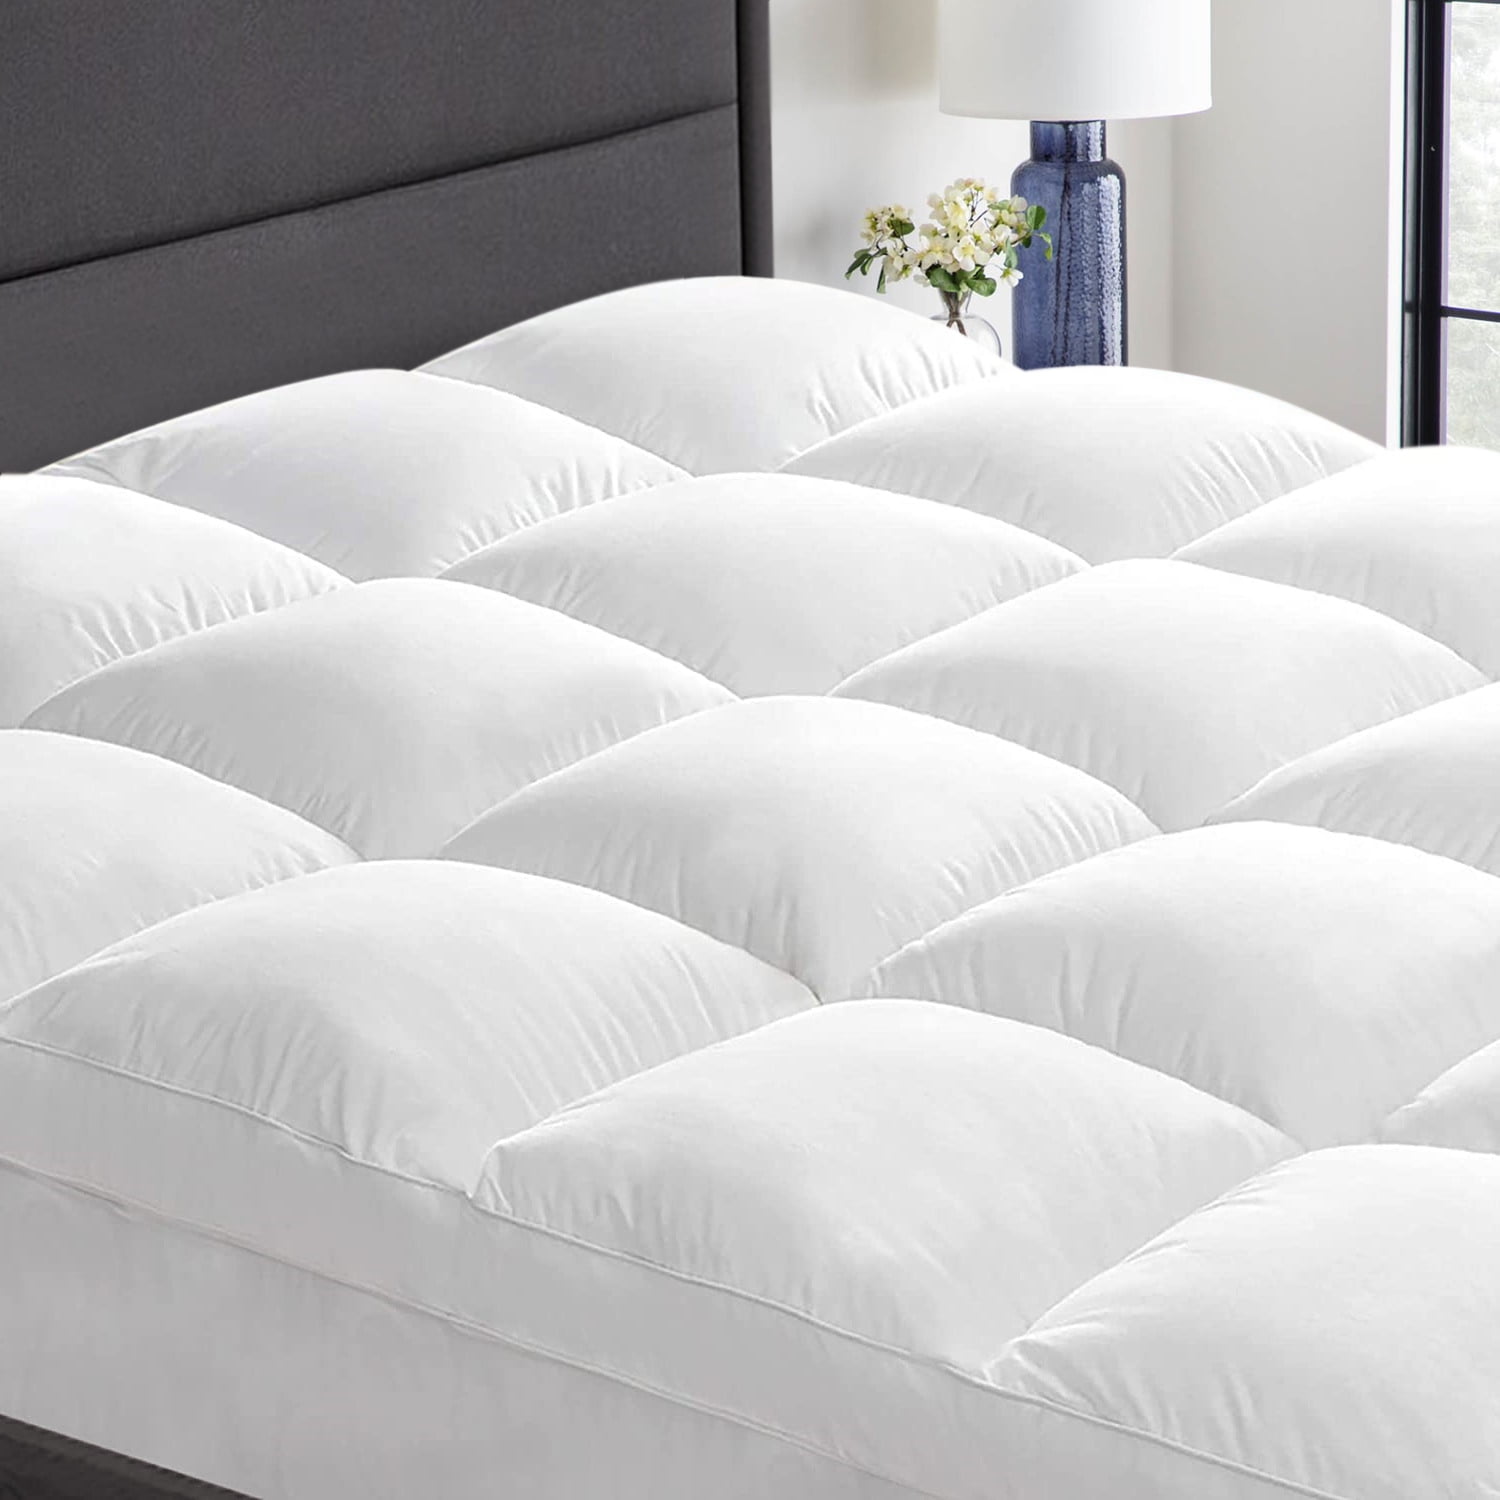 Mattress Topper Bed Pad Pillow Top Overfilled Cotton Cover Deep Pocket Fitted 